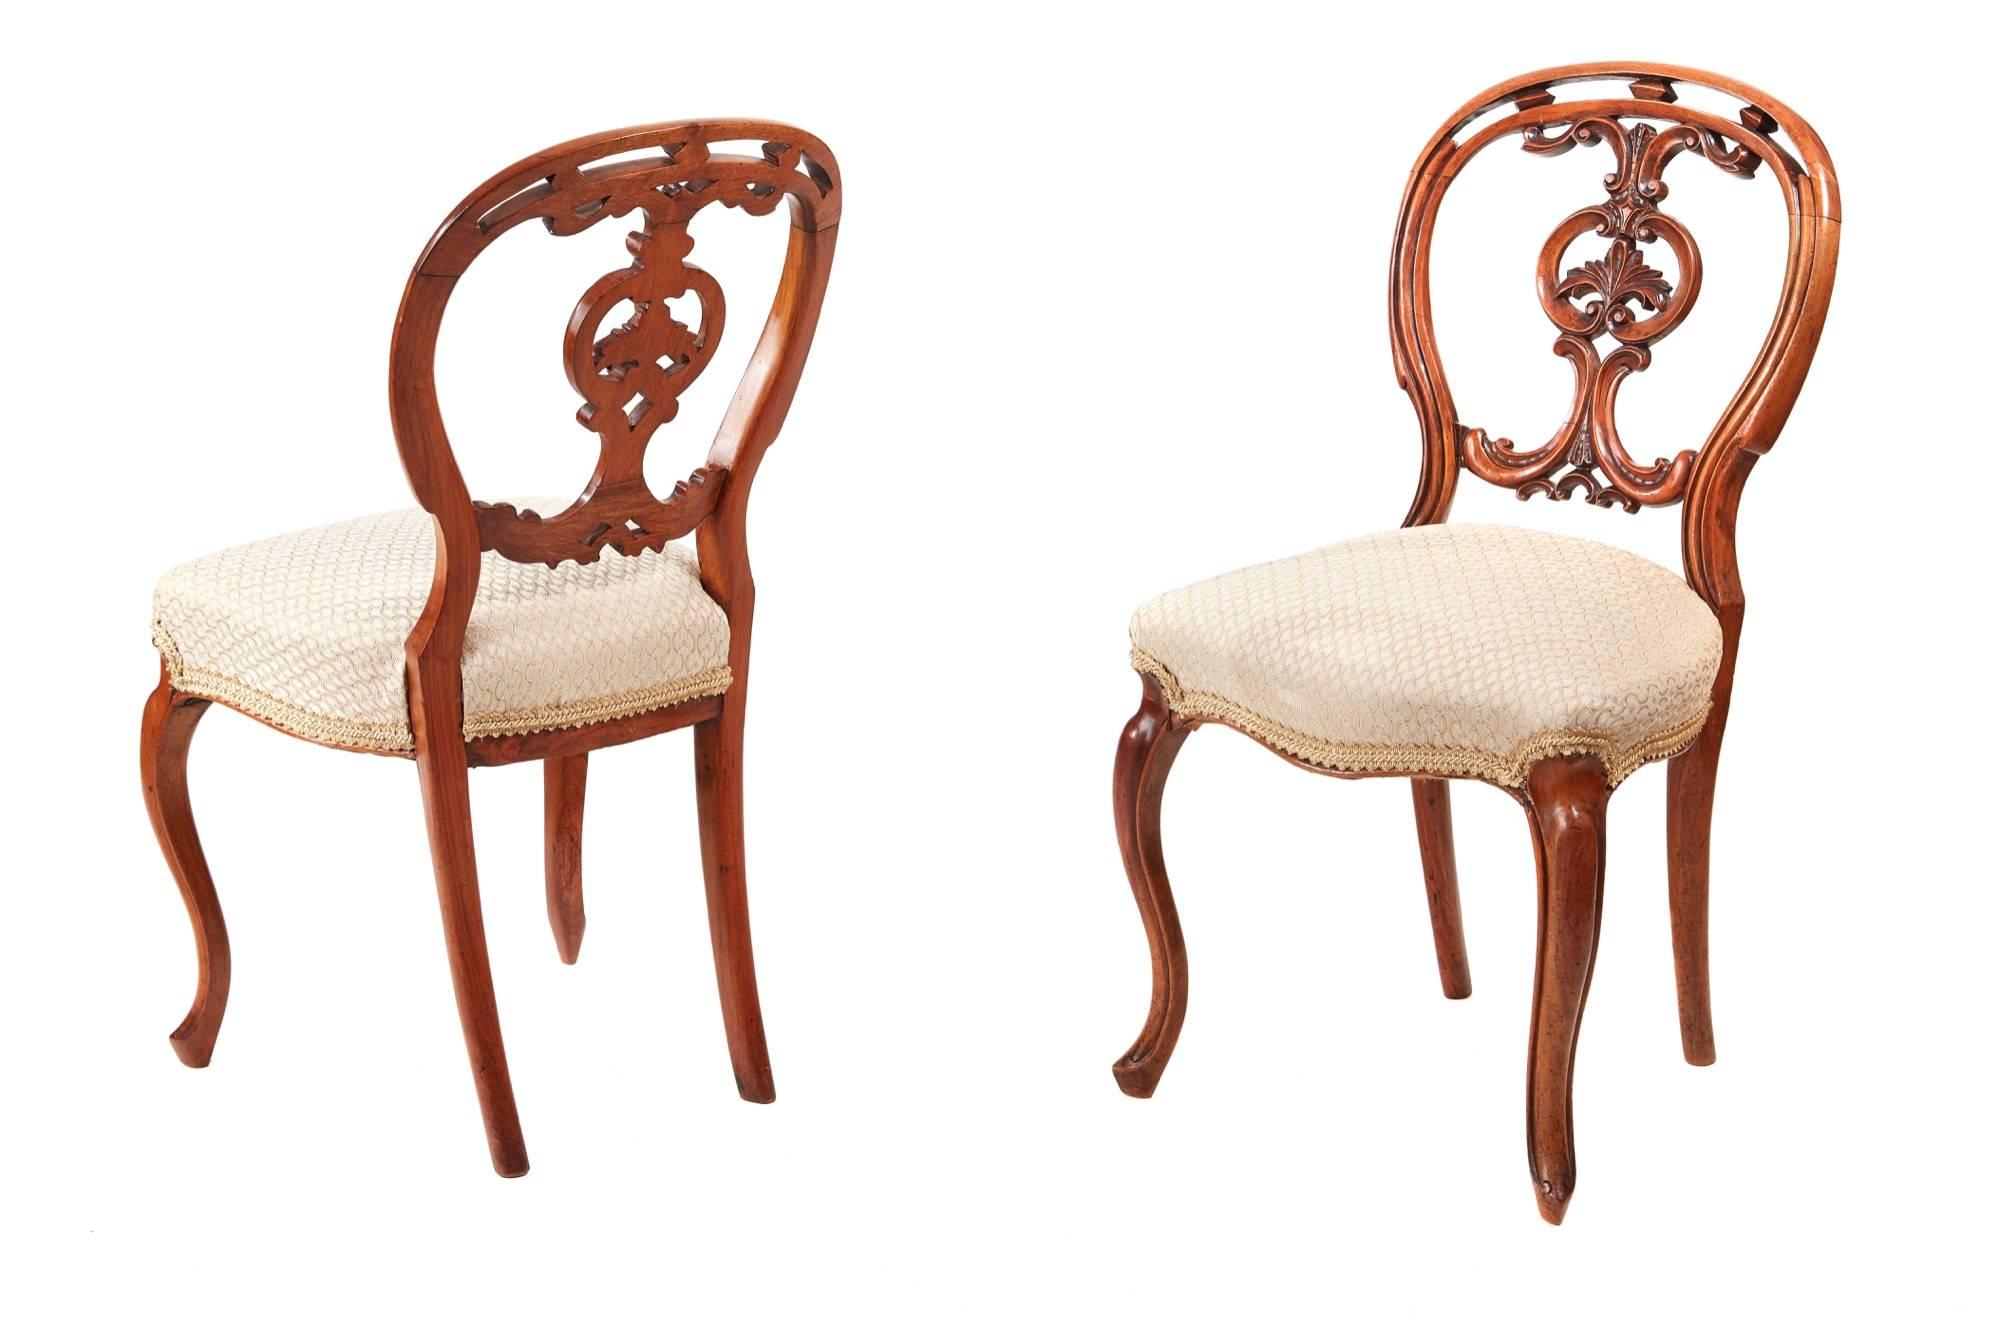 Quality set of six Victorian carved walnut dining chairs, with rounded shaped backs having delicately cartouche and carved crested centre, newly re-upholstered seats, with a serpentine front rail supported on elegant cabriole legs to the front